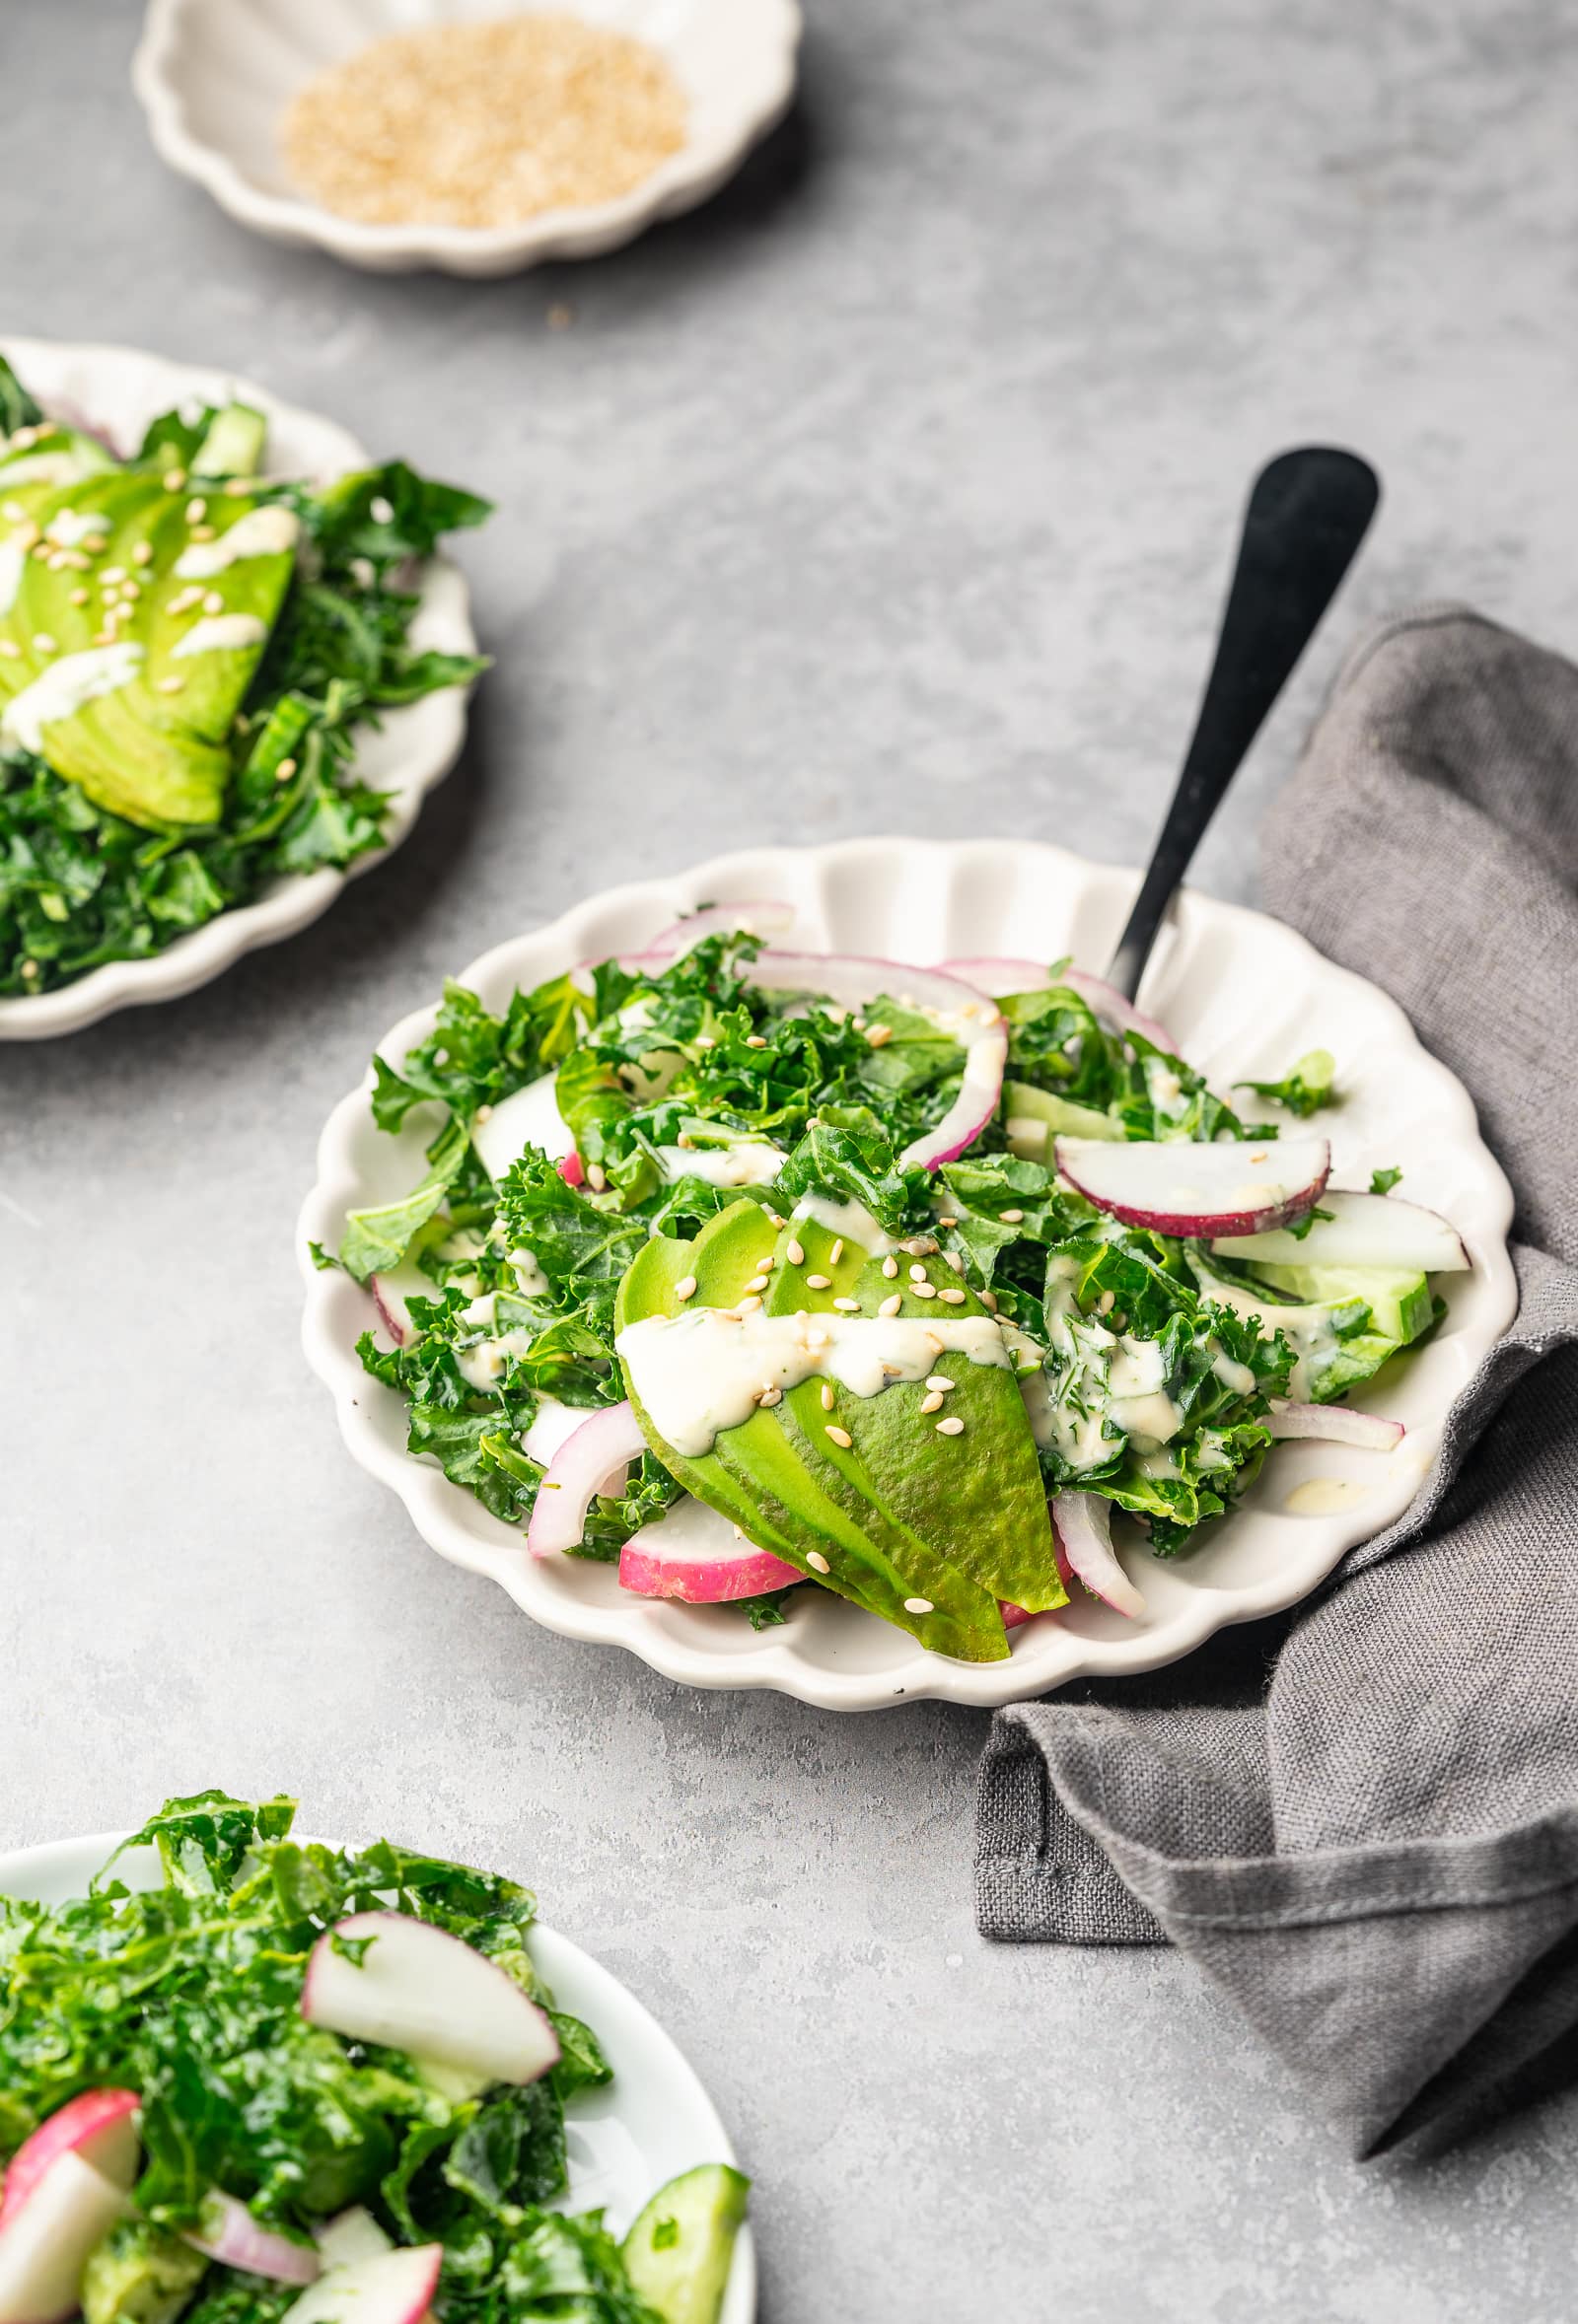 Kale salad with tahini dressing served on plates with avocado slices and sesame seeds.